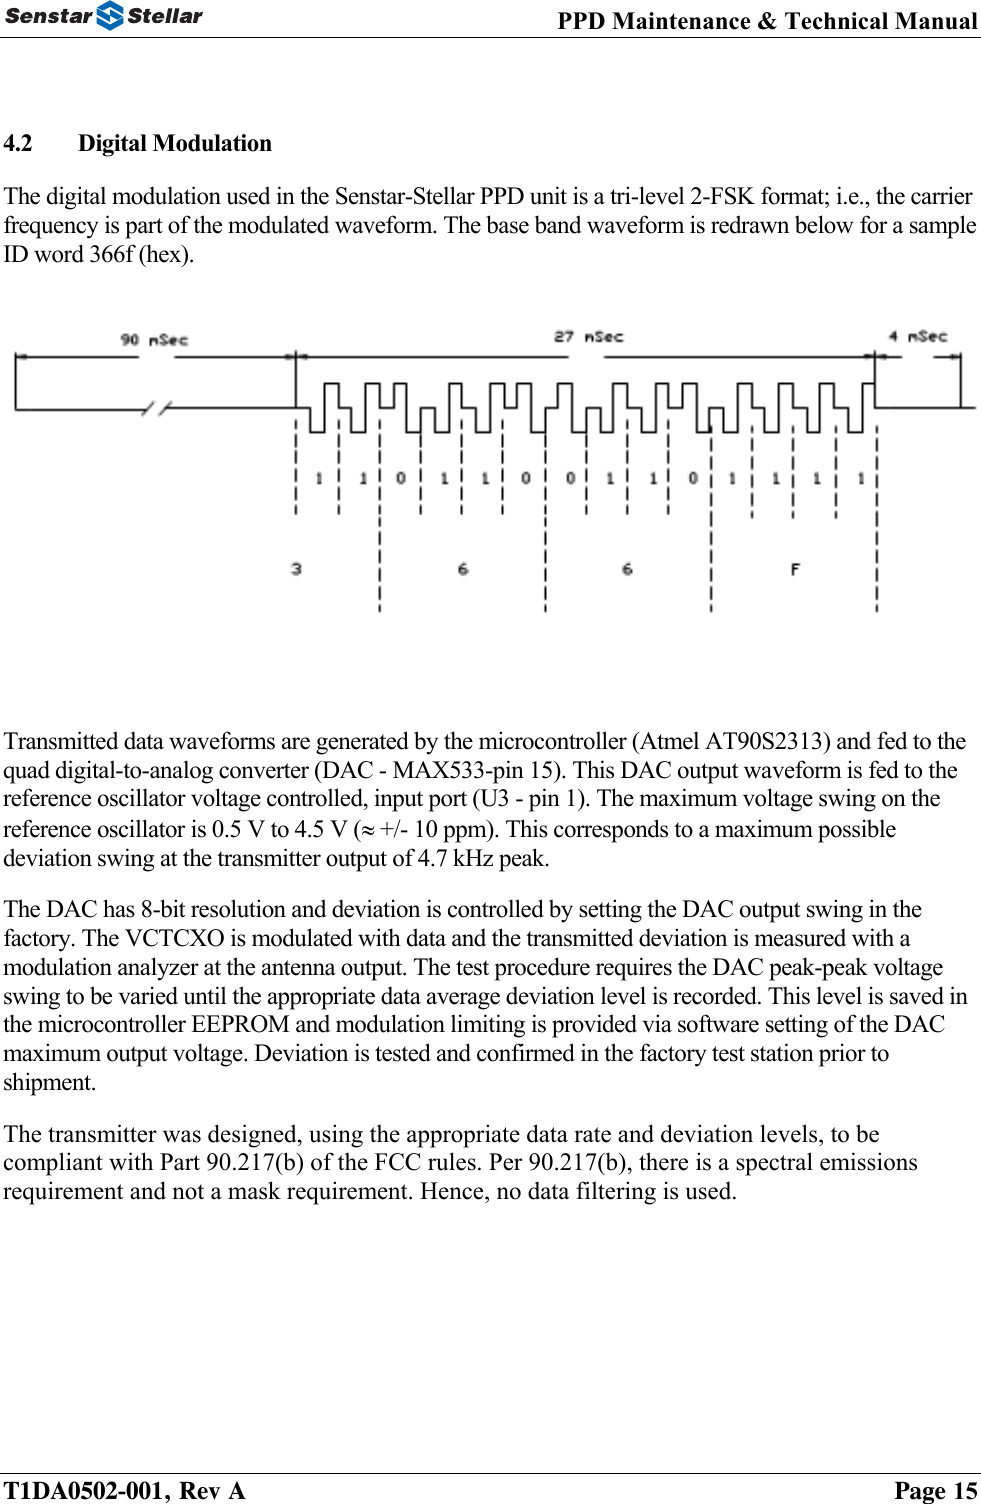 PPD Maintenance &amp; Technical Manual   4.2  Digital Modulation  The digital modulation used in the Senstar-Stellar PPD unit is a tri-level 2-FSK format; i.e., the carrier frequency is part of the modulated waveform. The base band waveform is redrawn below for a sample ID word 366f (hex).   Transmitted data waveforms are generated by the microcontroller (Atmel AT90S2313) and fed to the quad digital-to-analog converter (DAC - MAX533-pin 15). This DAC output waveform is fed to the reference oscillator voltage controlled, input port (U3 - pin 1). The maximum voltage swing on the reference oscillator is 0.5 V to 4.5 V (≈ +/- 10 ppm). This corresponds to a maximum possible deviation swing at the transmitter output of 4.7 kHz peak.   The DAC has 8-bit resolution and deviation is controlled by setting the DAC output swing in the factory. The VCTCXO is modulated with data and the transmitted deviation is measured with a modulation analyzer at the antenna output. The test procedure requires the DAC peak-peak voltage swing to be varied until the appropriate data average deviation level is recorded. This level is saved in the microcontroller EEPROM and modulation limiting is provided via software setting of the DAC maximum output voltage. Deviation is tested and confirmed in the factory test station prior to shipment. The transmitter was designed, using the appropriate data rate and deviation levels, to be compliant with Part 90.217(b) of the FCC rules. Per 90.217(b), there is a spectral emissions requirement and not a mask requirement. Hence, no data filtering is used.    T1DA0502-001, Rev A    Page 15 